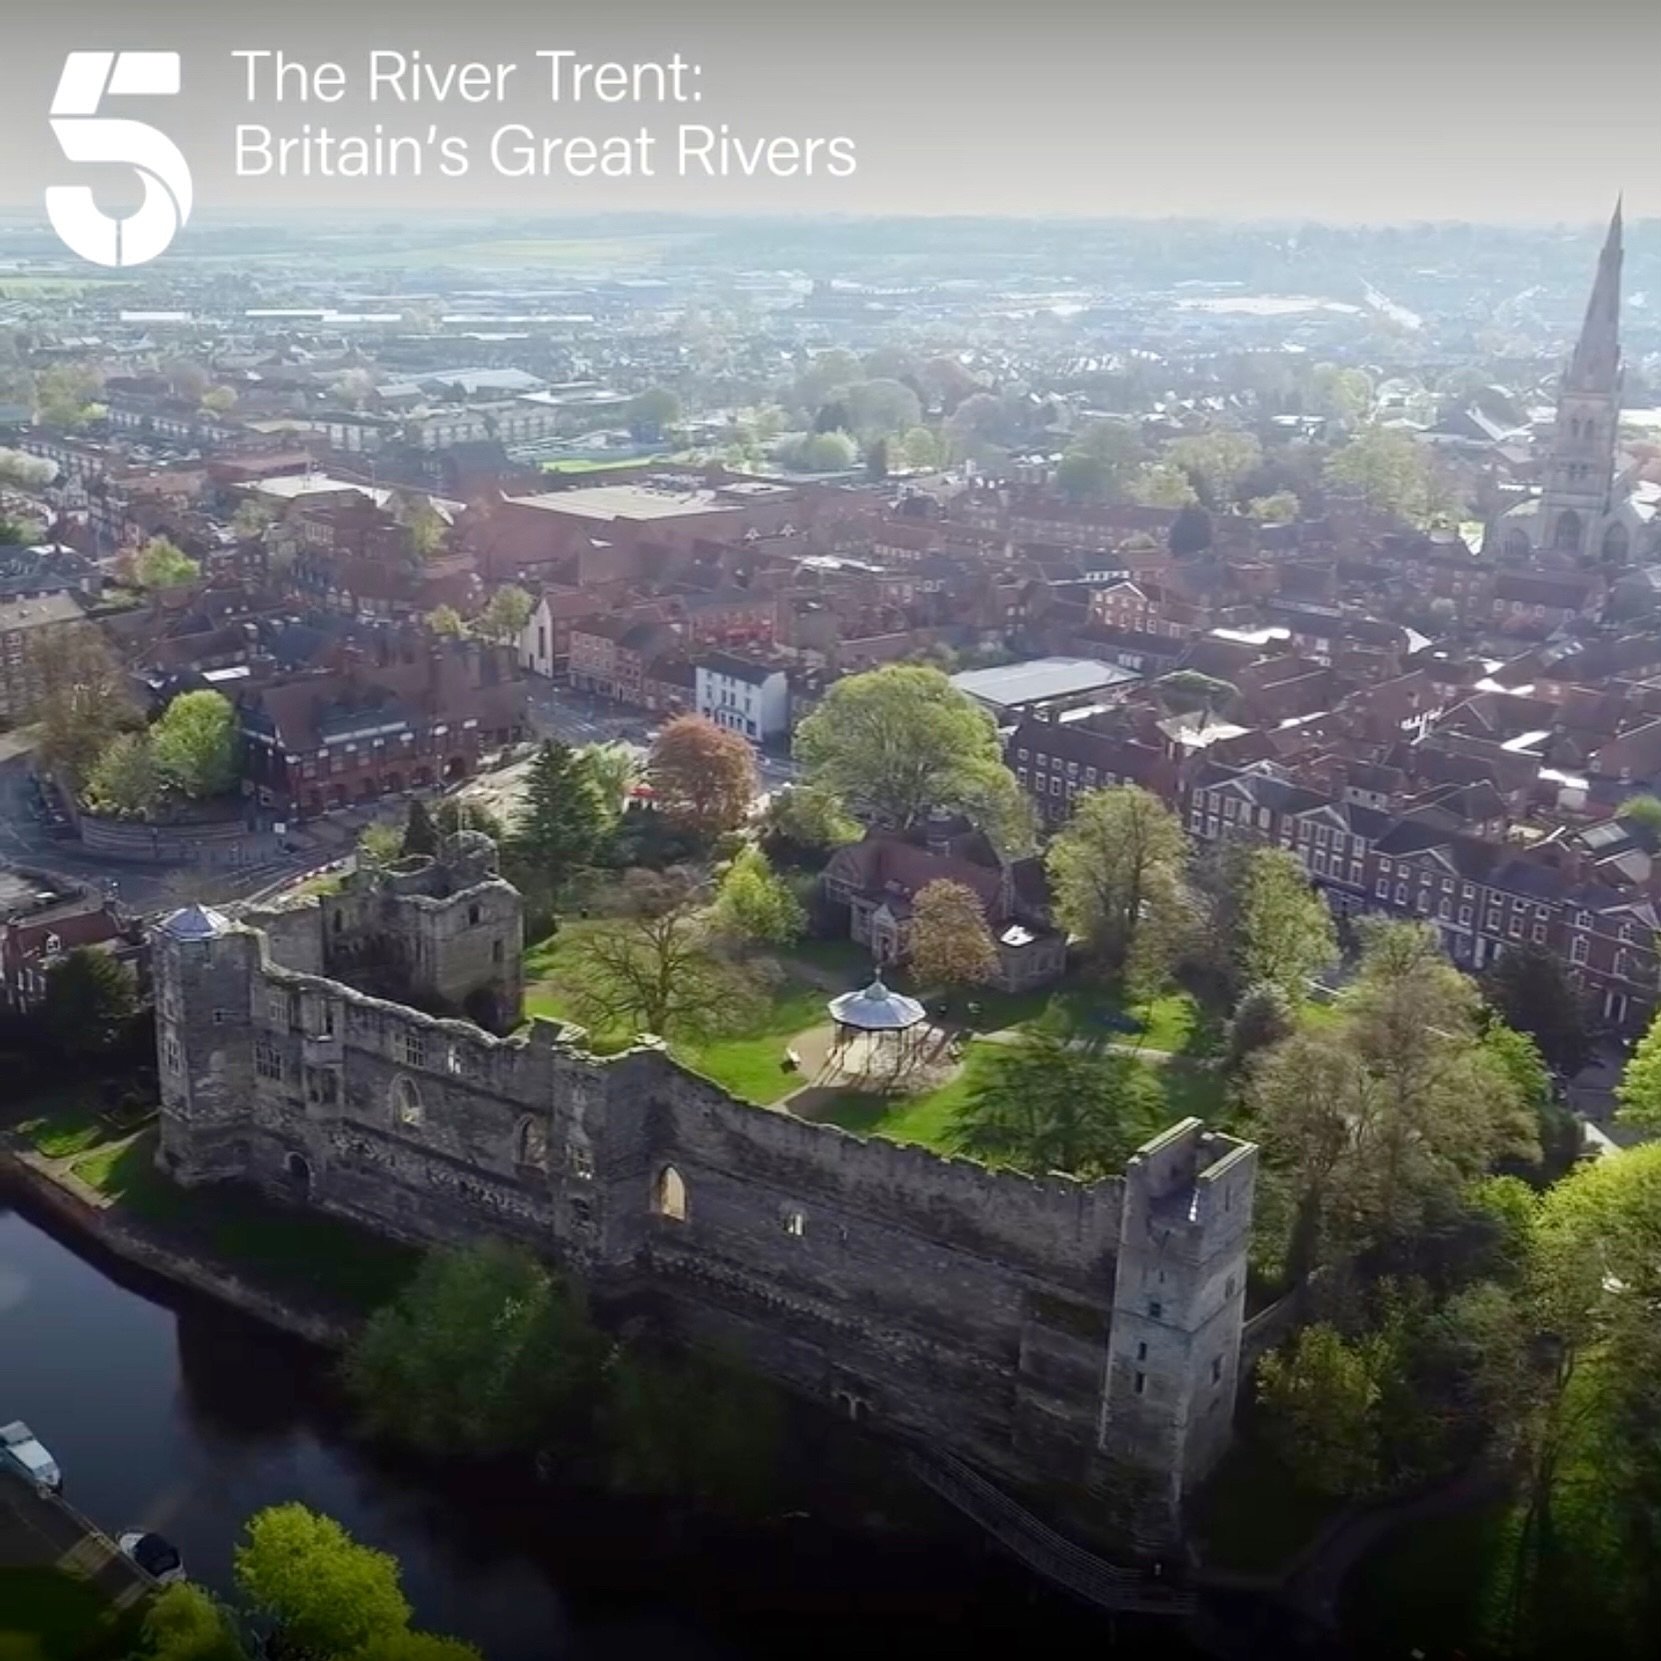 Always a proud feeling when we see our footage on the telly box especially on tonight&rsquo;s &lsquo;The River Trent: Britain&rsquo;s Great Rivers&rsquo; on Channel 5 🎥🎬

#thedroneman  #kurniaaerialphotography #DroneProduction #AerialProduction #Dr